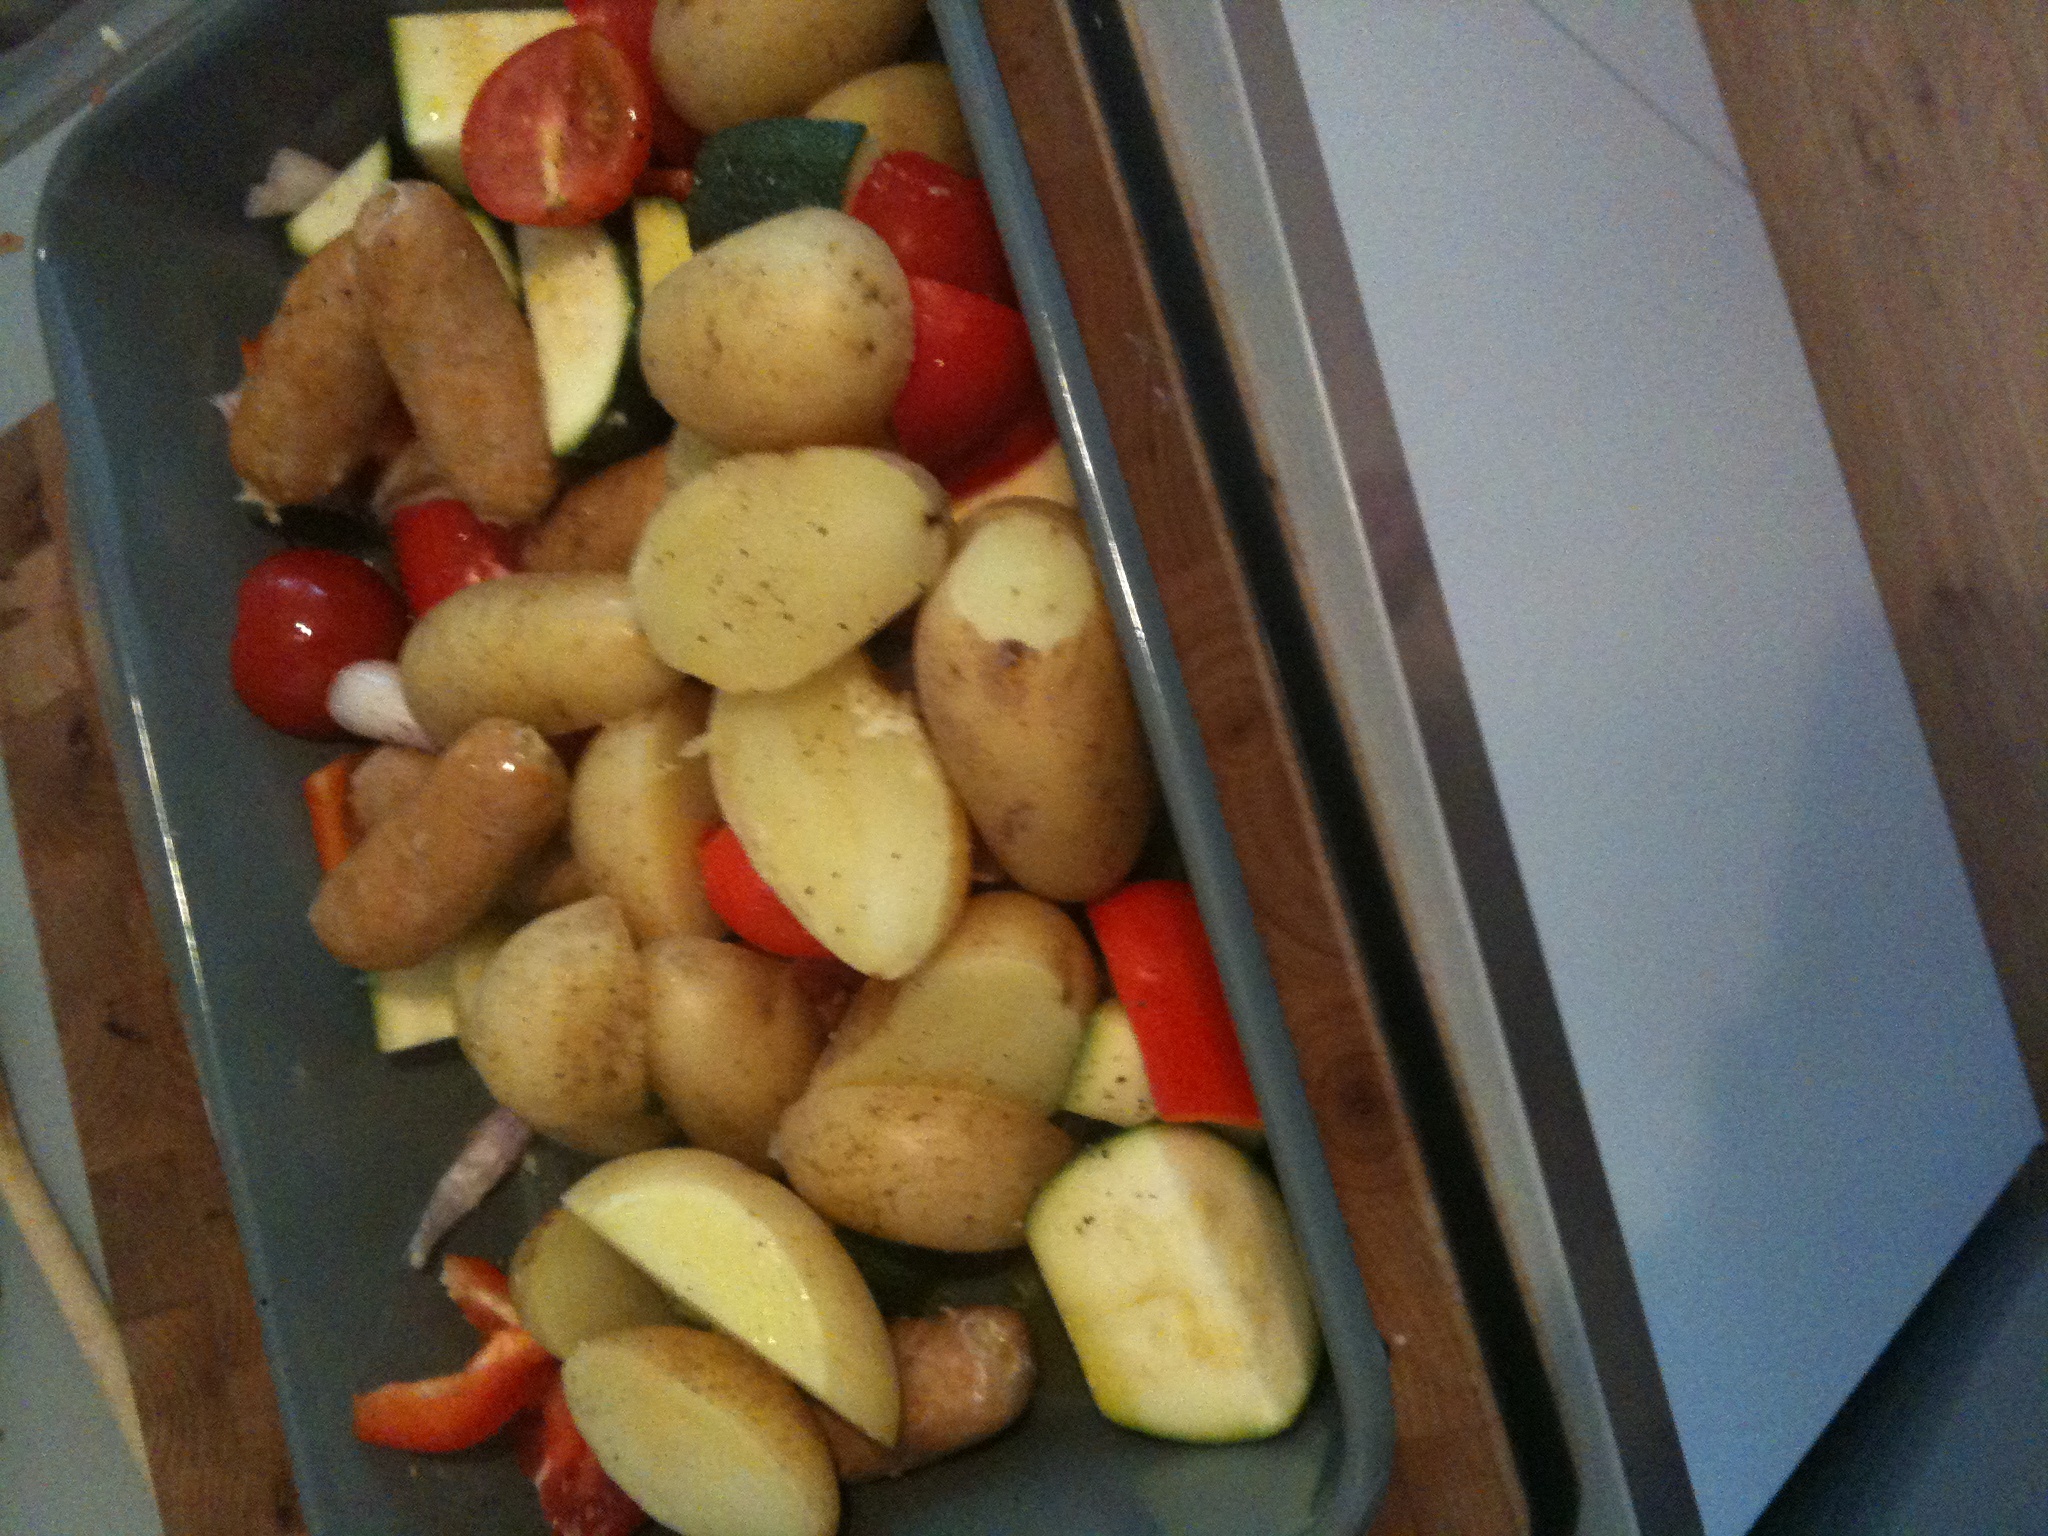 some potatoes and peppers in a bowl